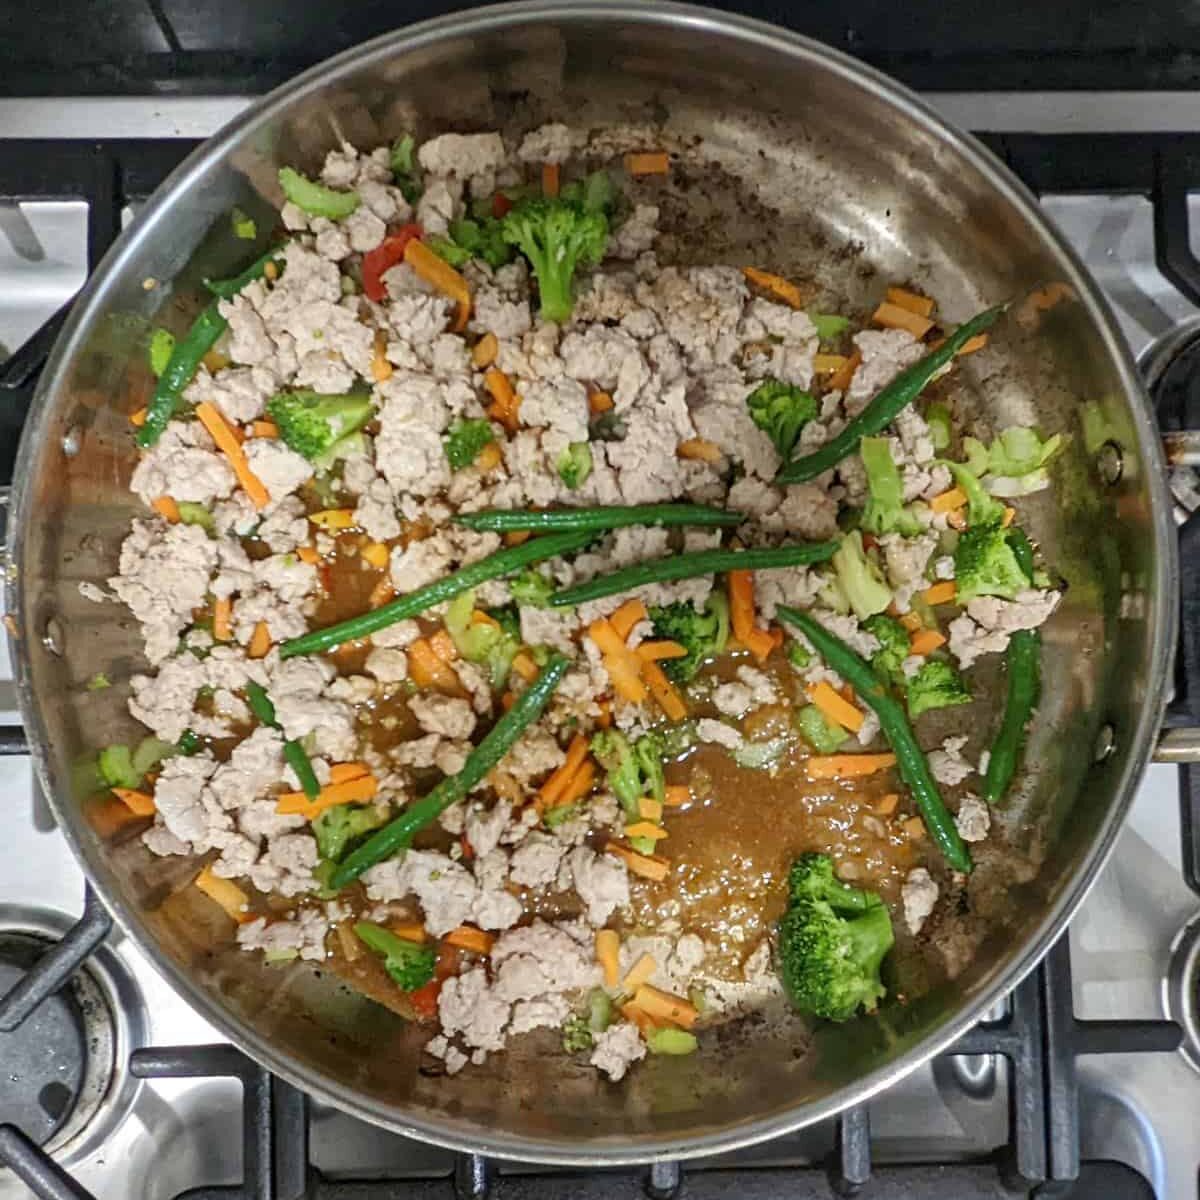 Stir fry sauce on top of ground chicken and vegetables in a pan.